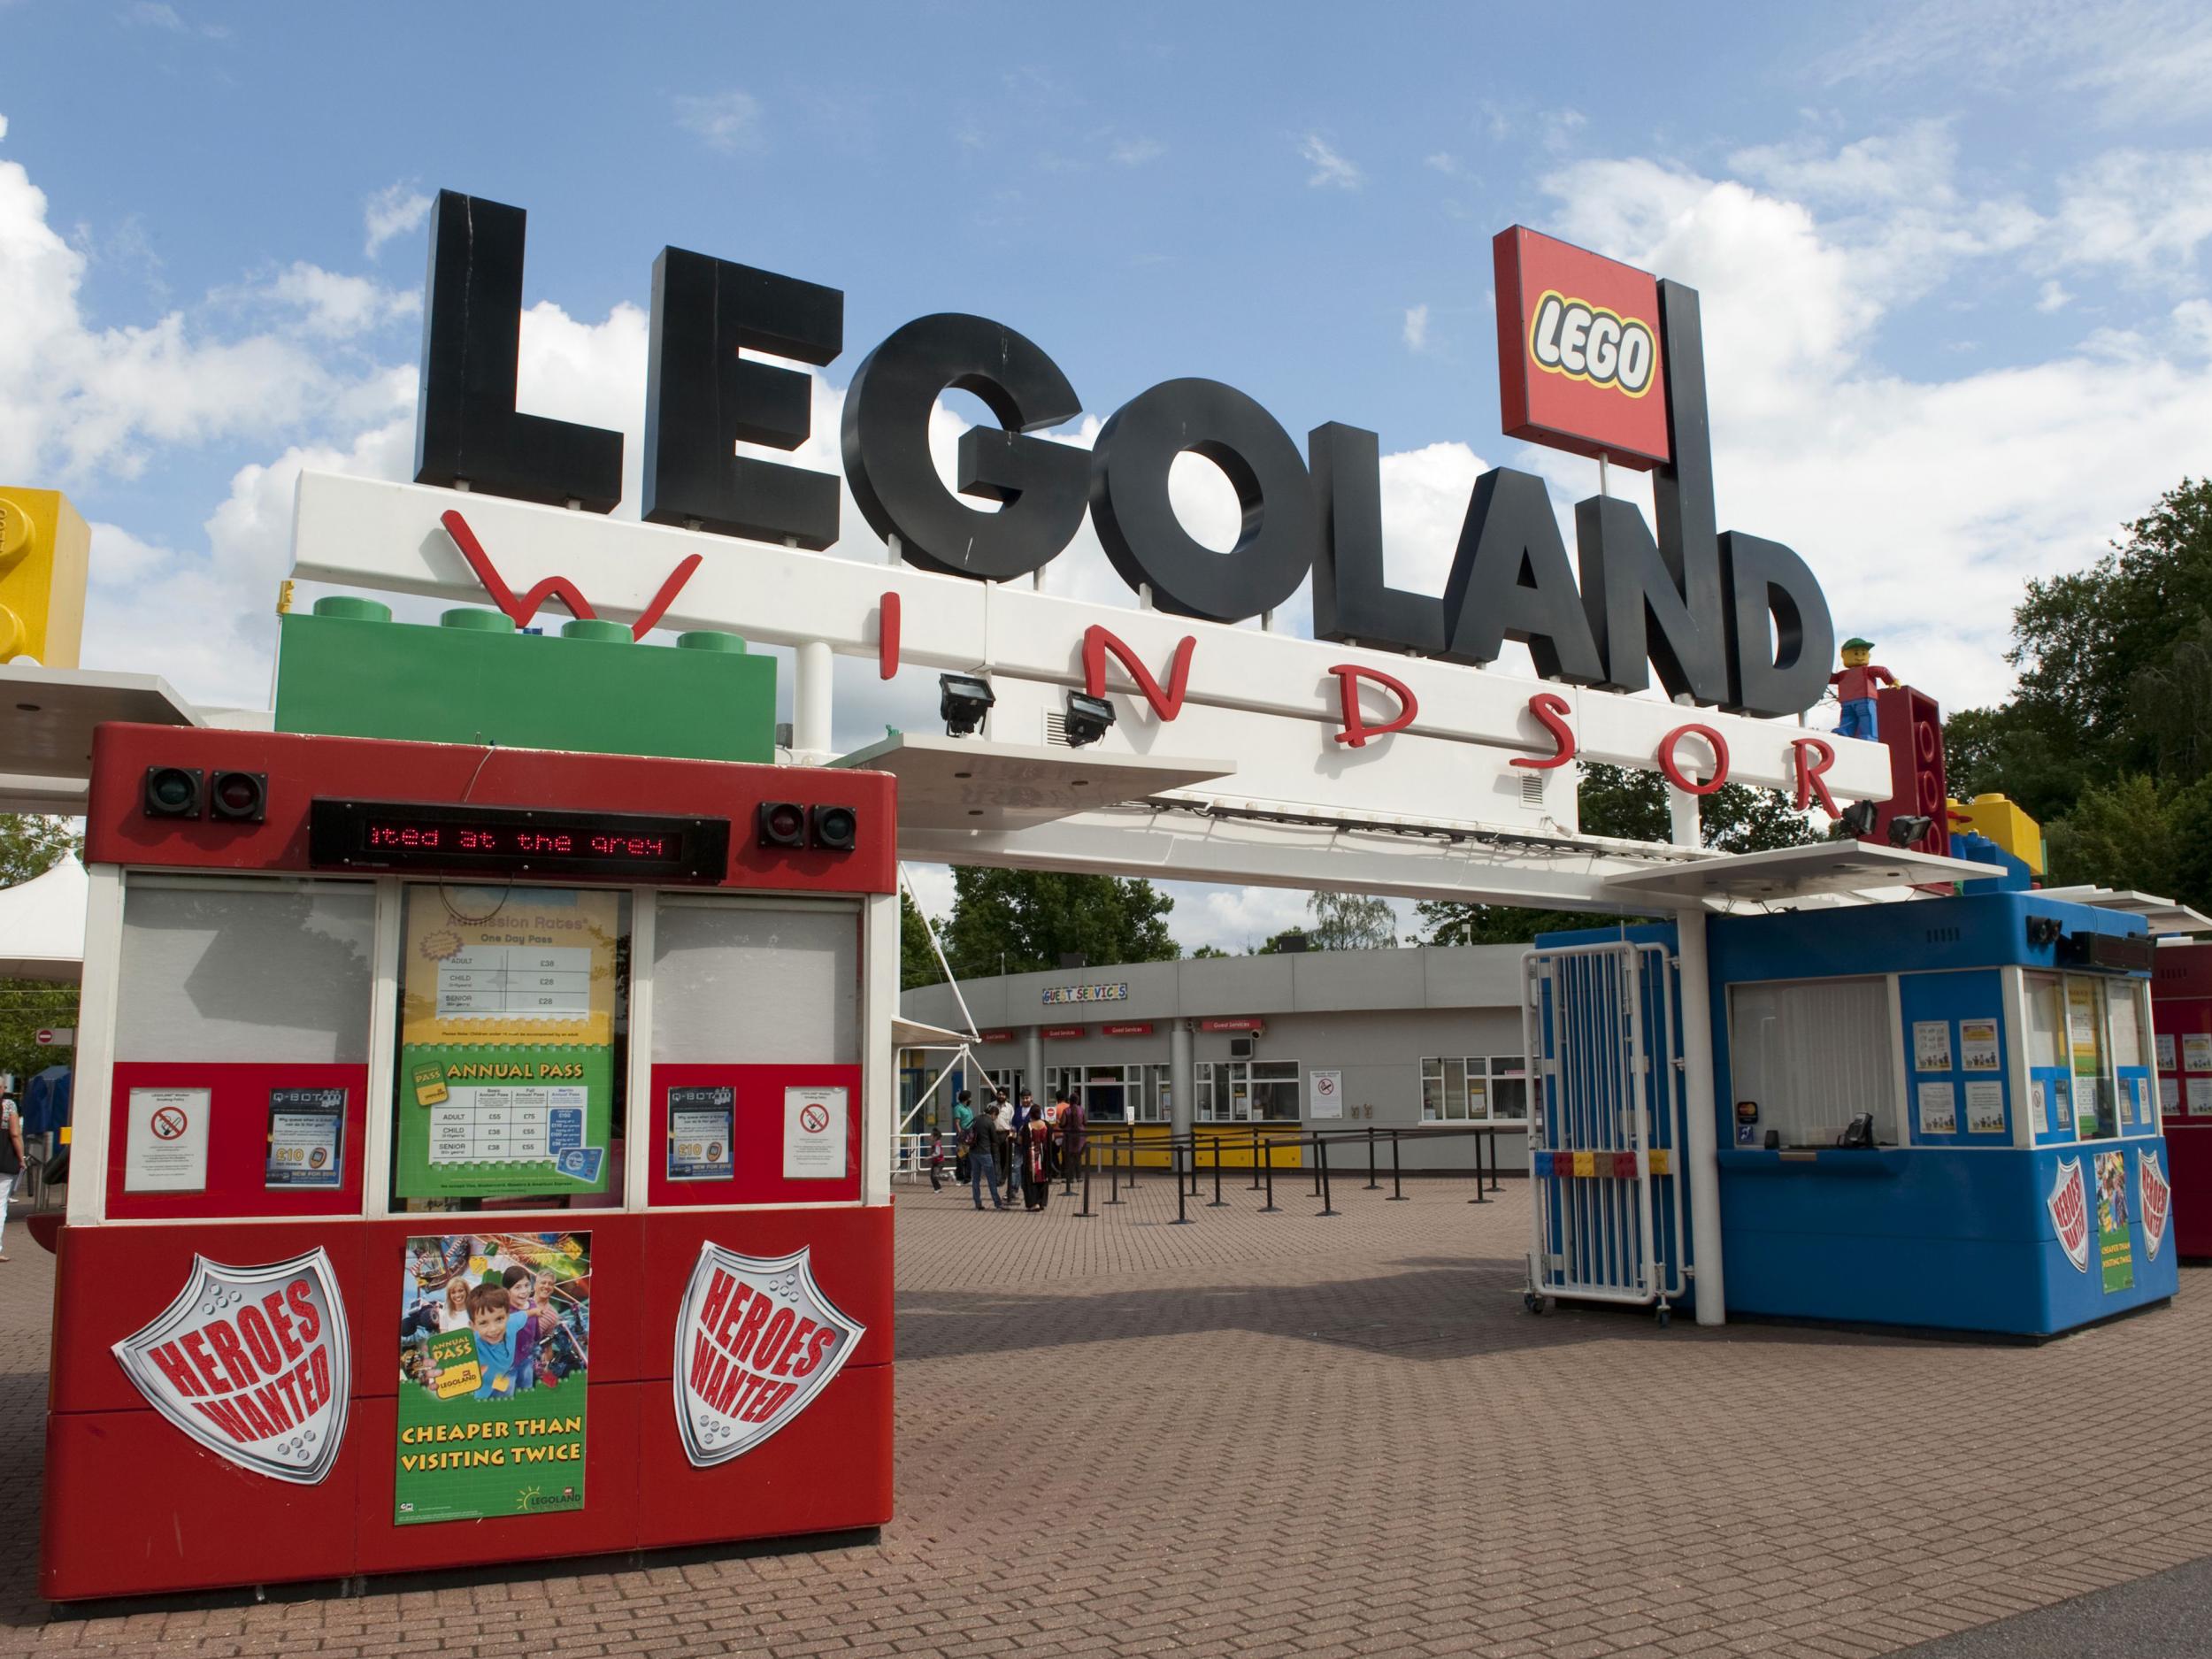 Legoland Windsor is the most visited theme park in the UK